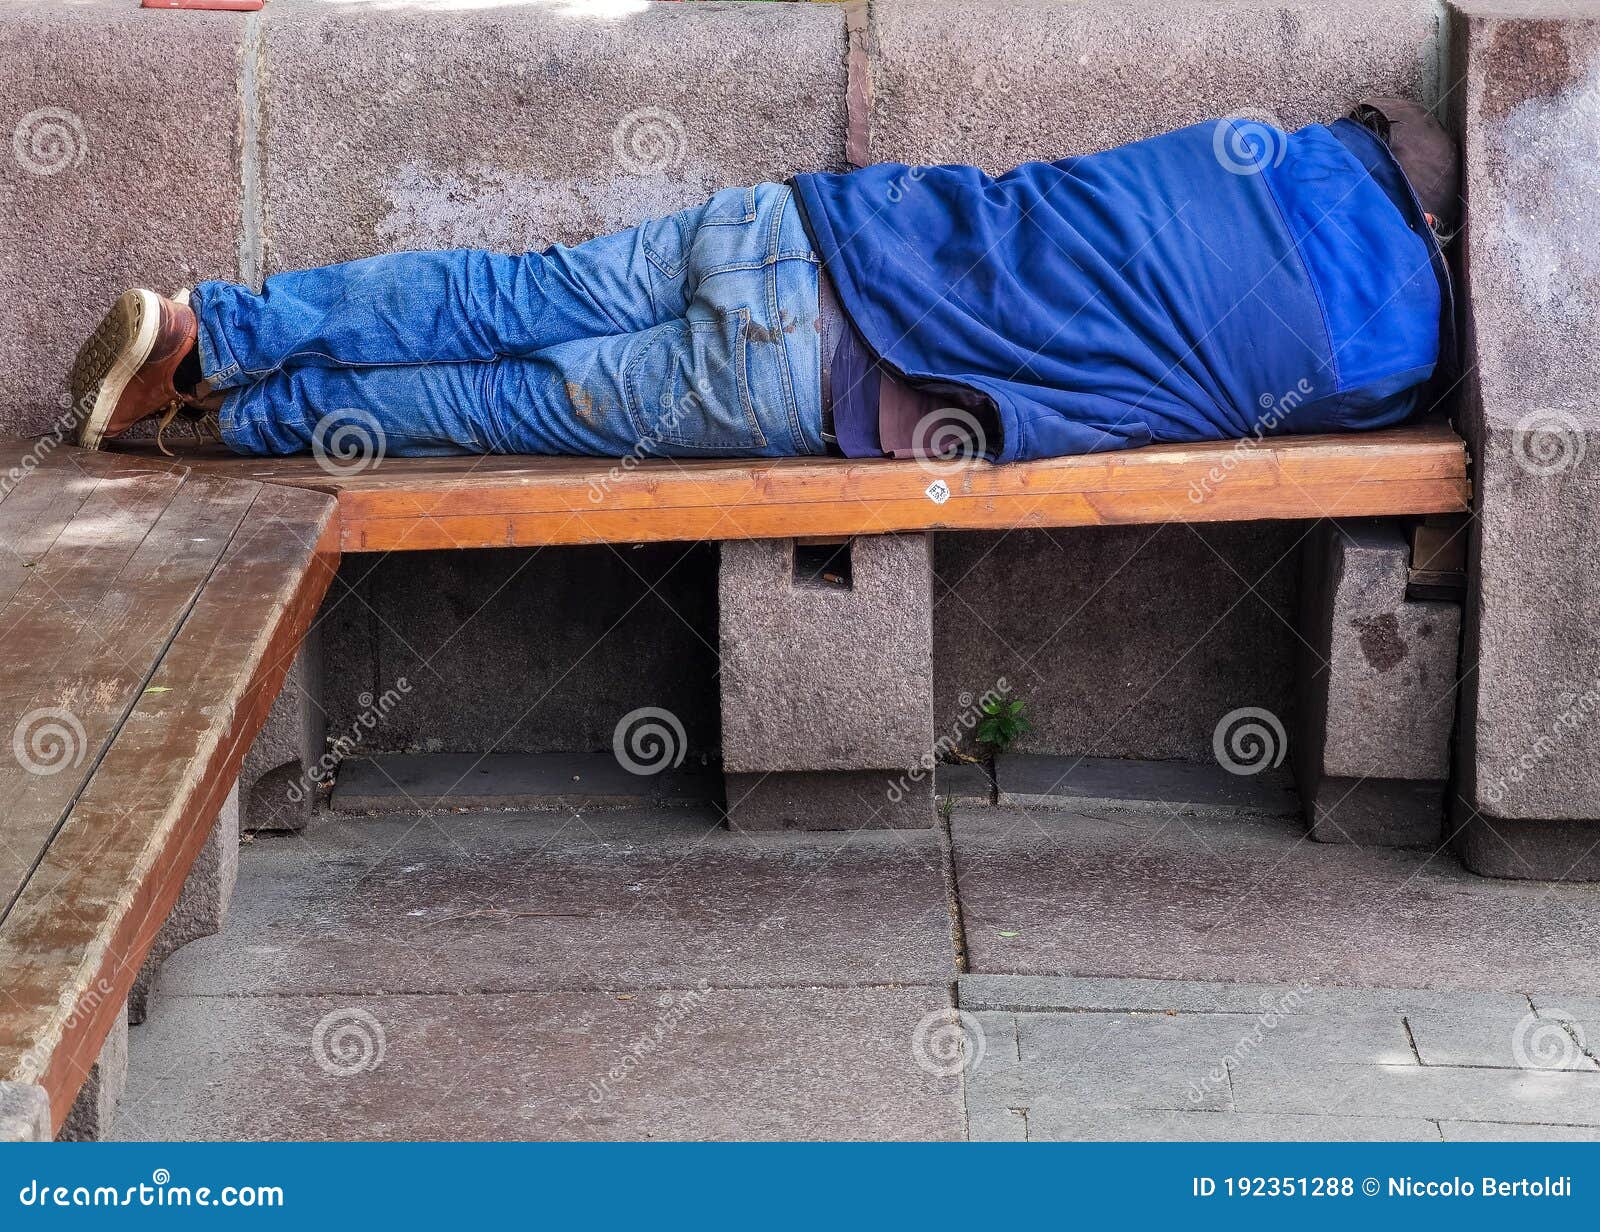 Homeless Man Sleeping Rough On A Park Bench Stock Photo Image Of